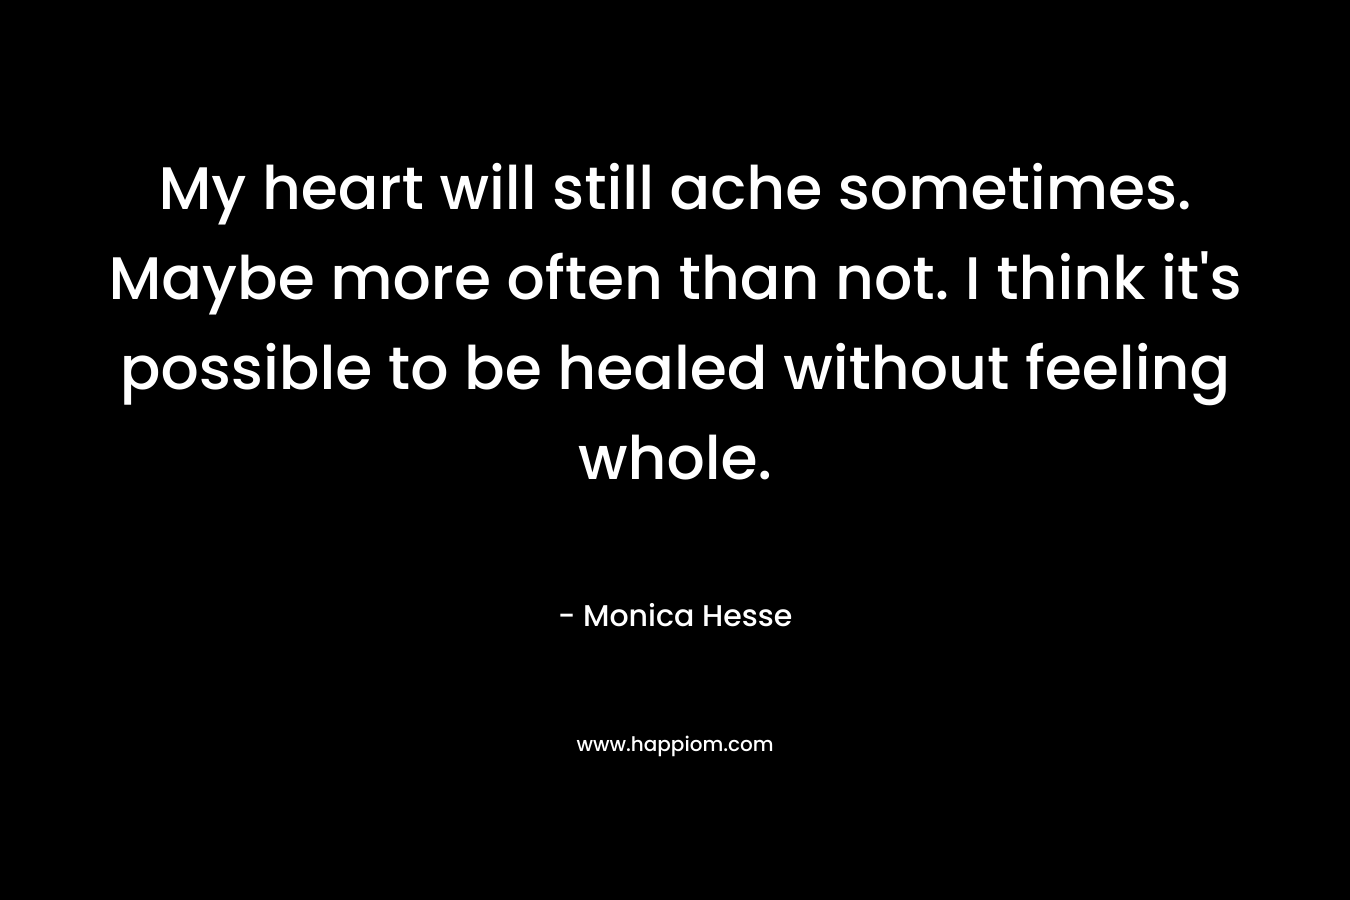 My heart will still ache sometimes. Maybe more often than not. I think it’s possible to be healed without feeling whole. – Monica Hesse